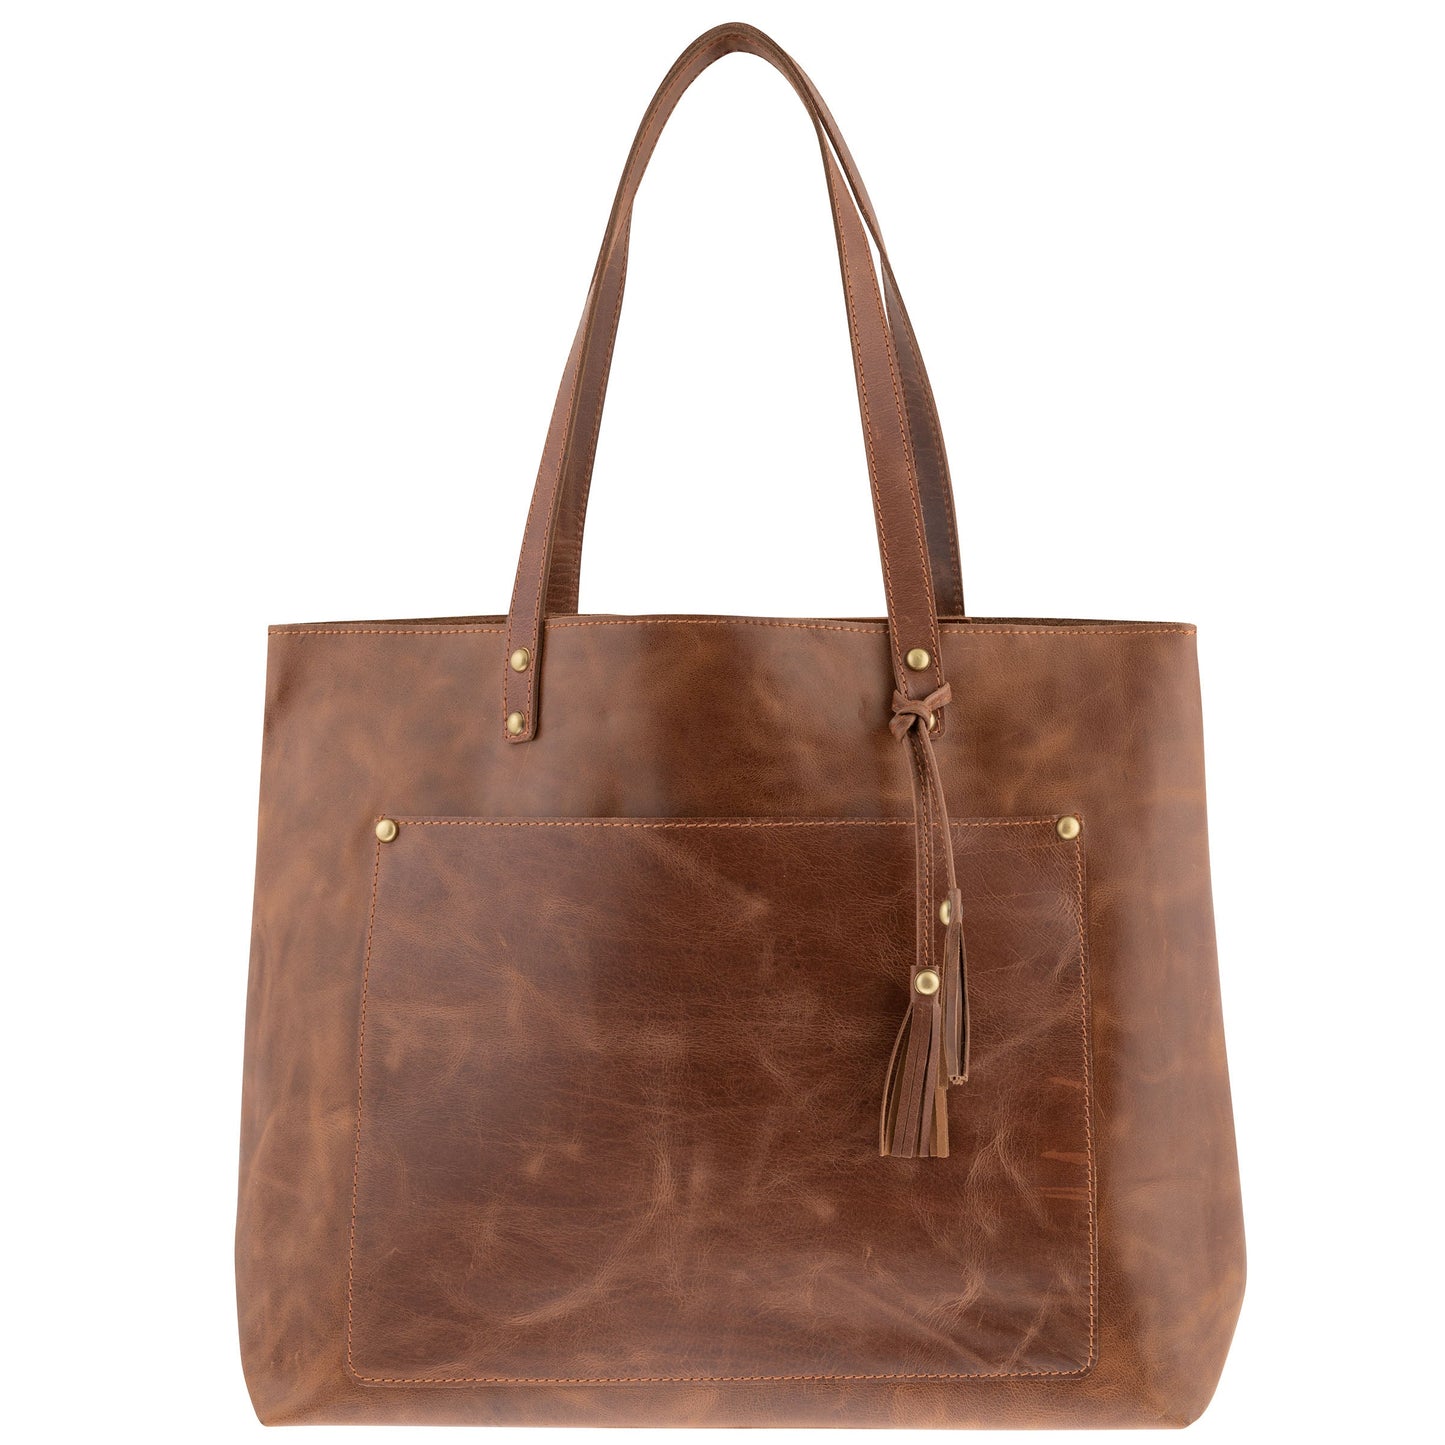 brown leather tote with tassel on a white background.